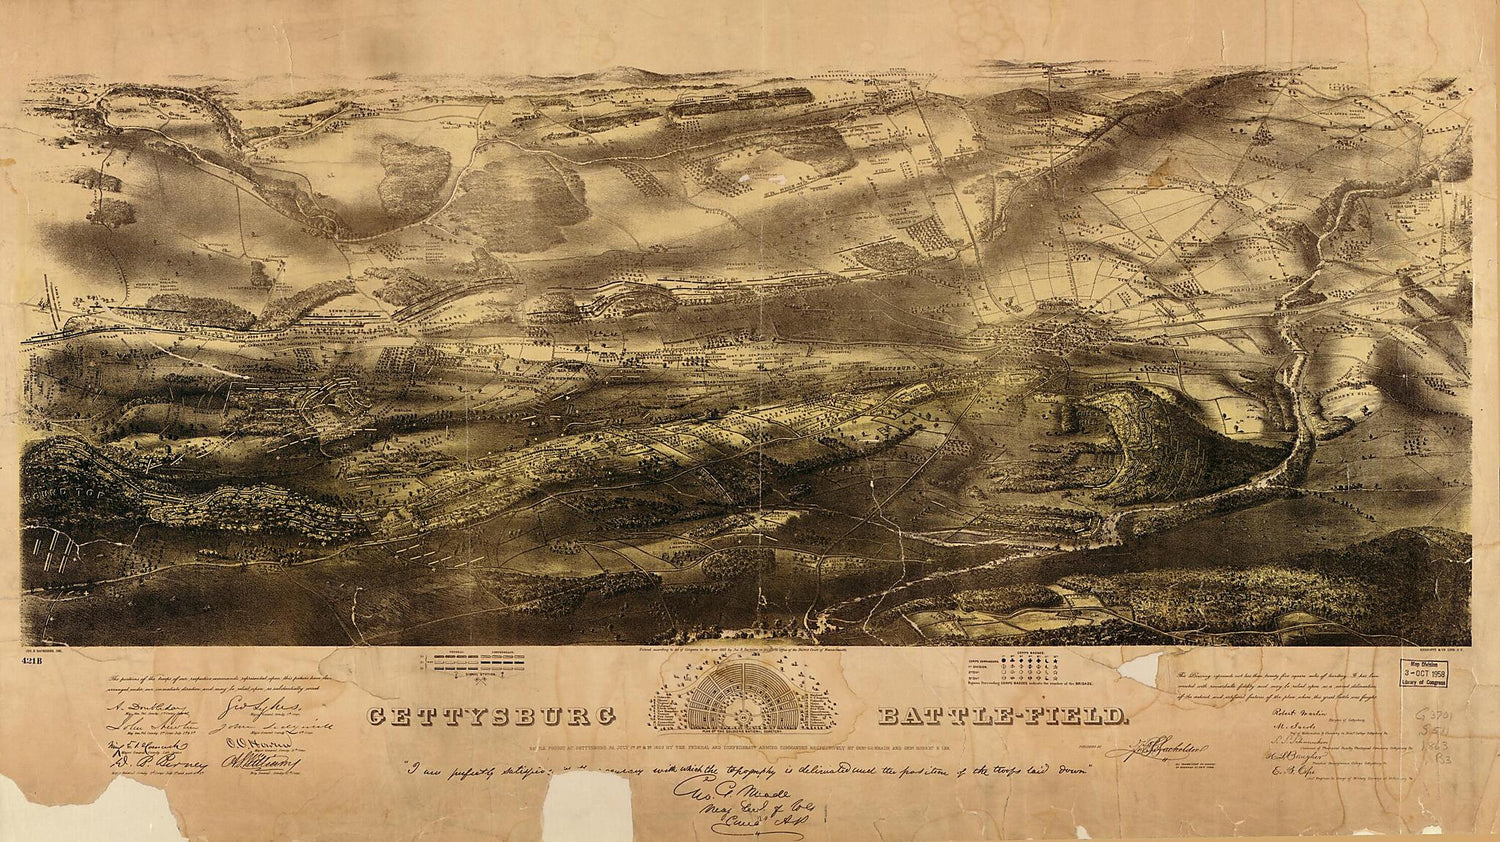 This old map of Field. Battle Fought at Gettysburg, Pennsylvania, July 1st, 2d &amp; 3d, from 1863 by the Federal and Confederate Armies, Commanded Respectively by Genl. G. G. Meade and Genl. Robert E. Lee was created by John B. (John Badger) Bachelder in 18